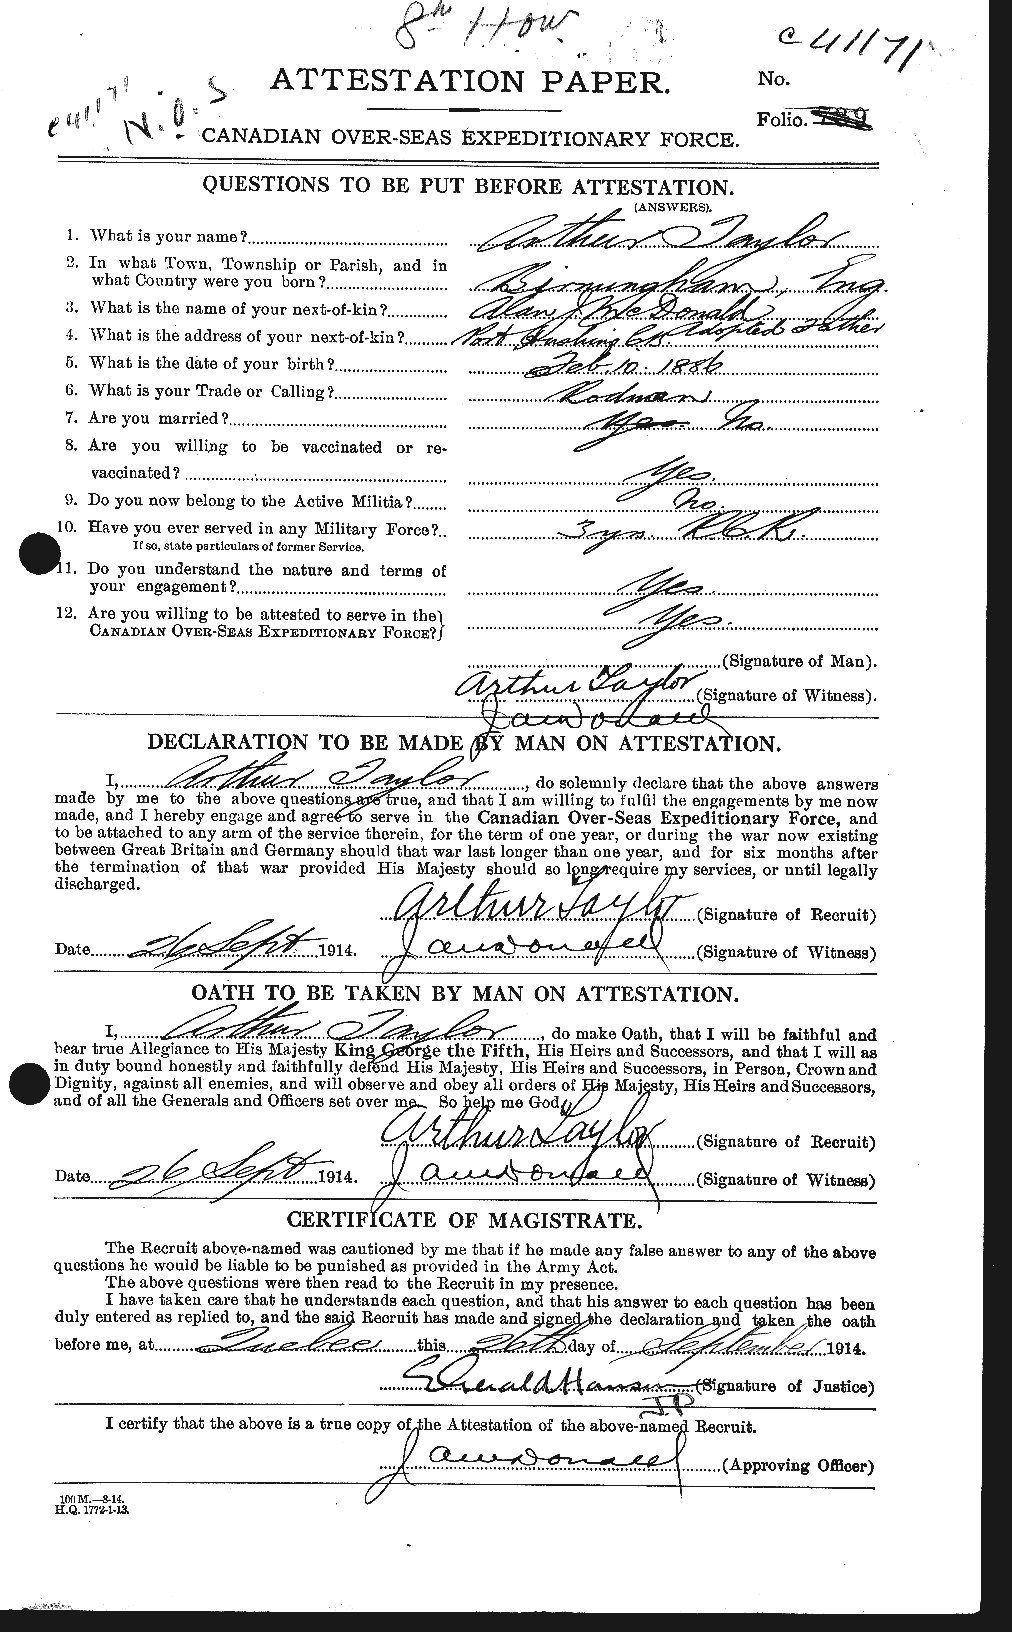 Personnel Records of the First World War - CEF 626258a